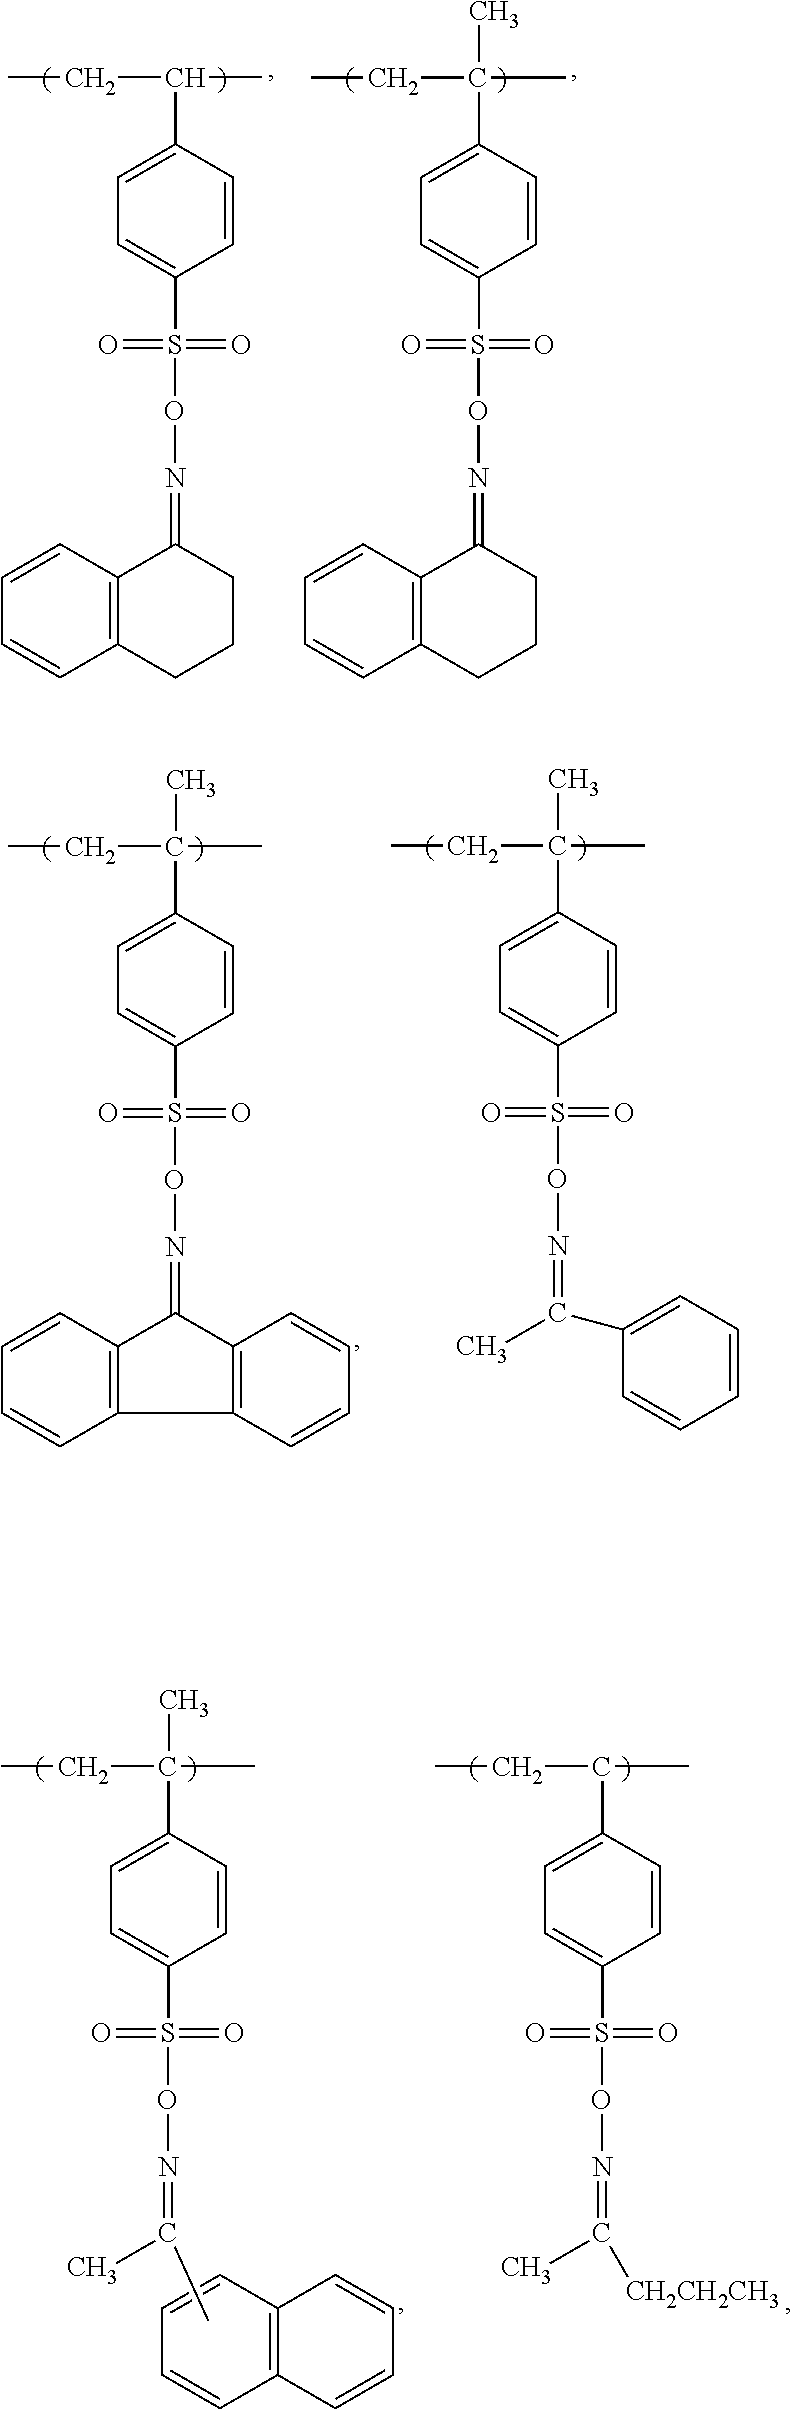 Electroless plating method using non-reducing agent